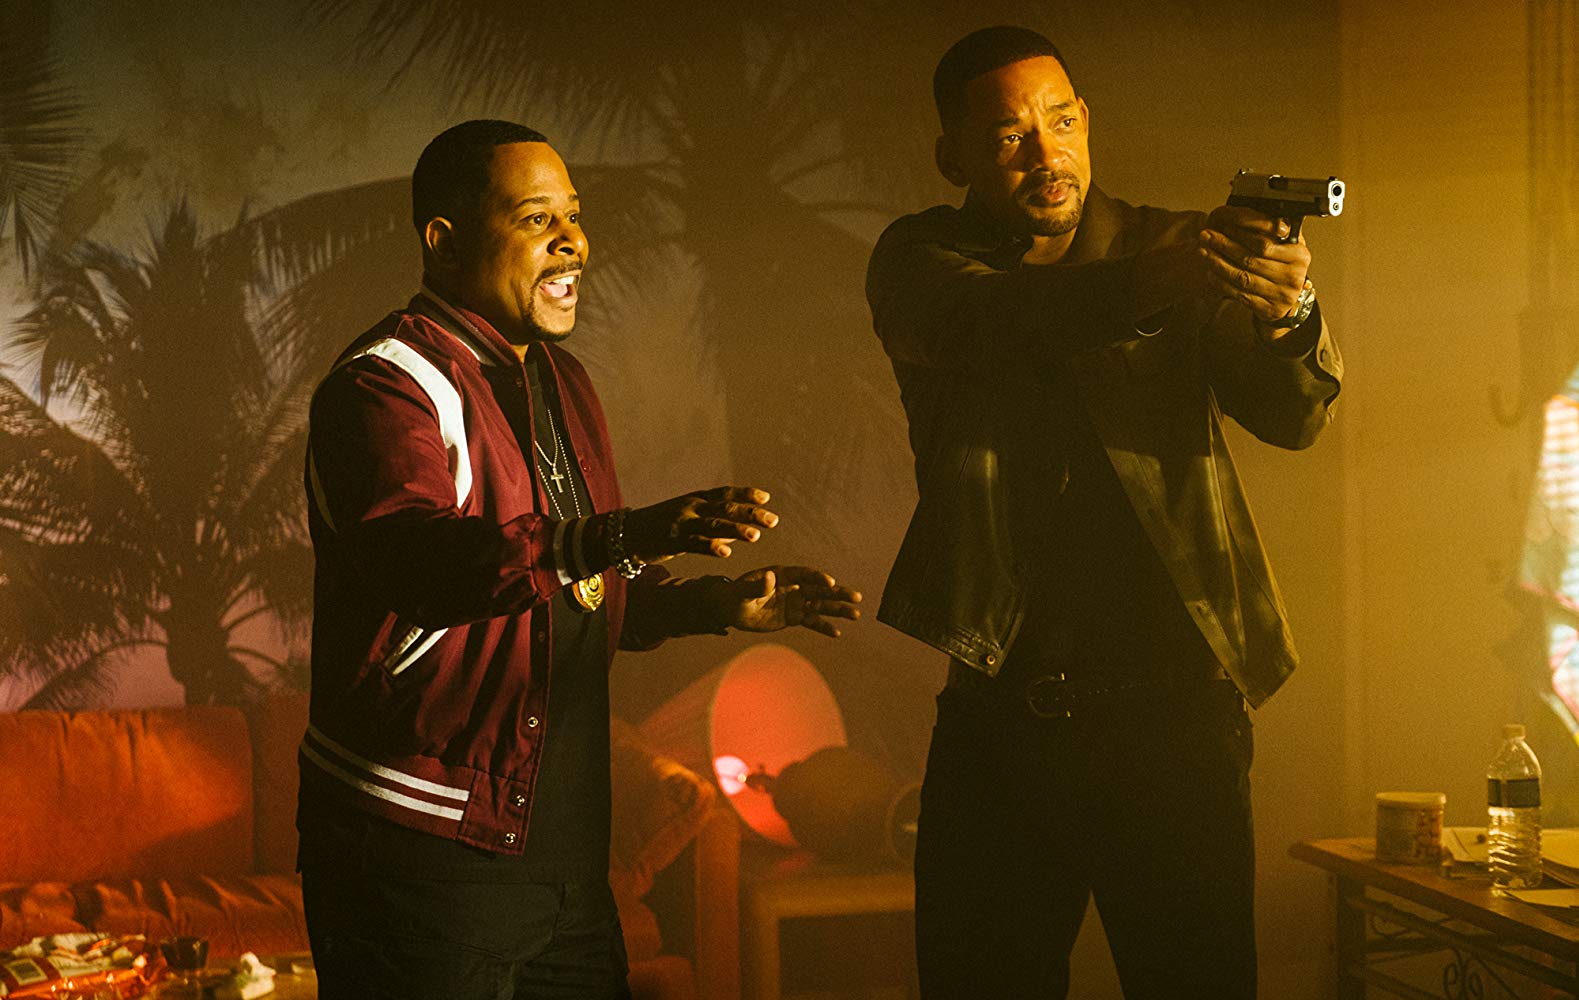 'Bad Boys 4' On The Way After 'Bad Boys For Life' Has Killer Box Office Weekend